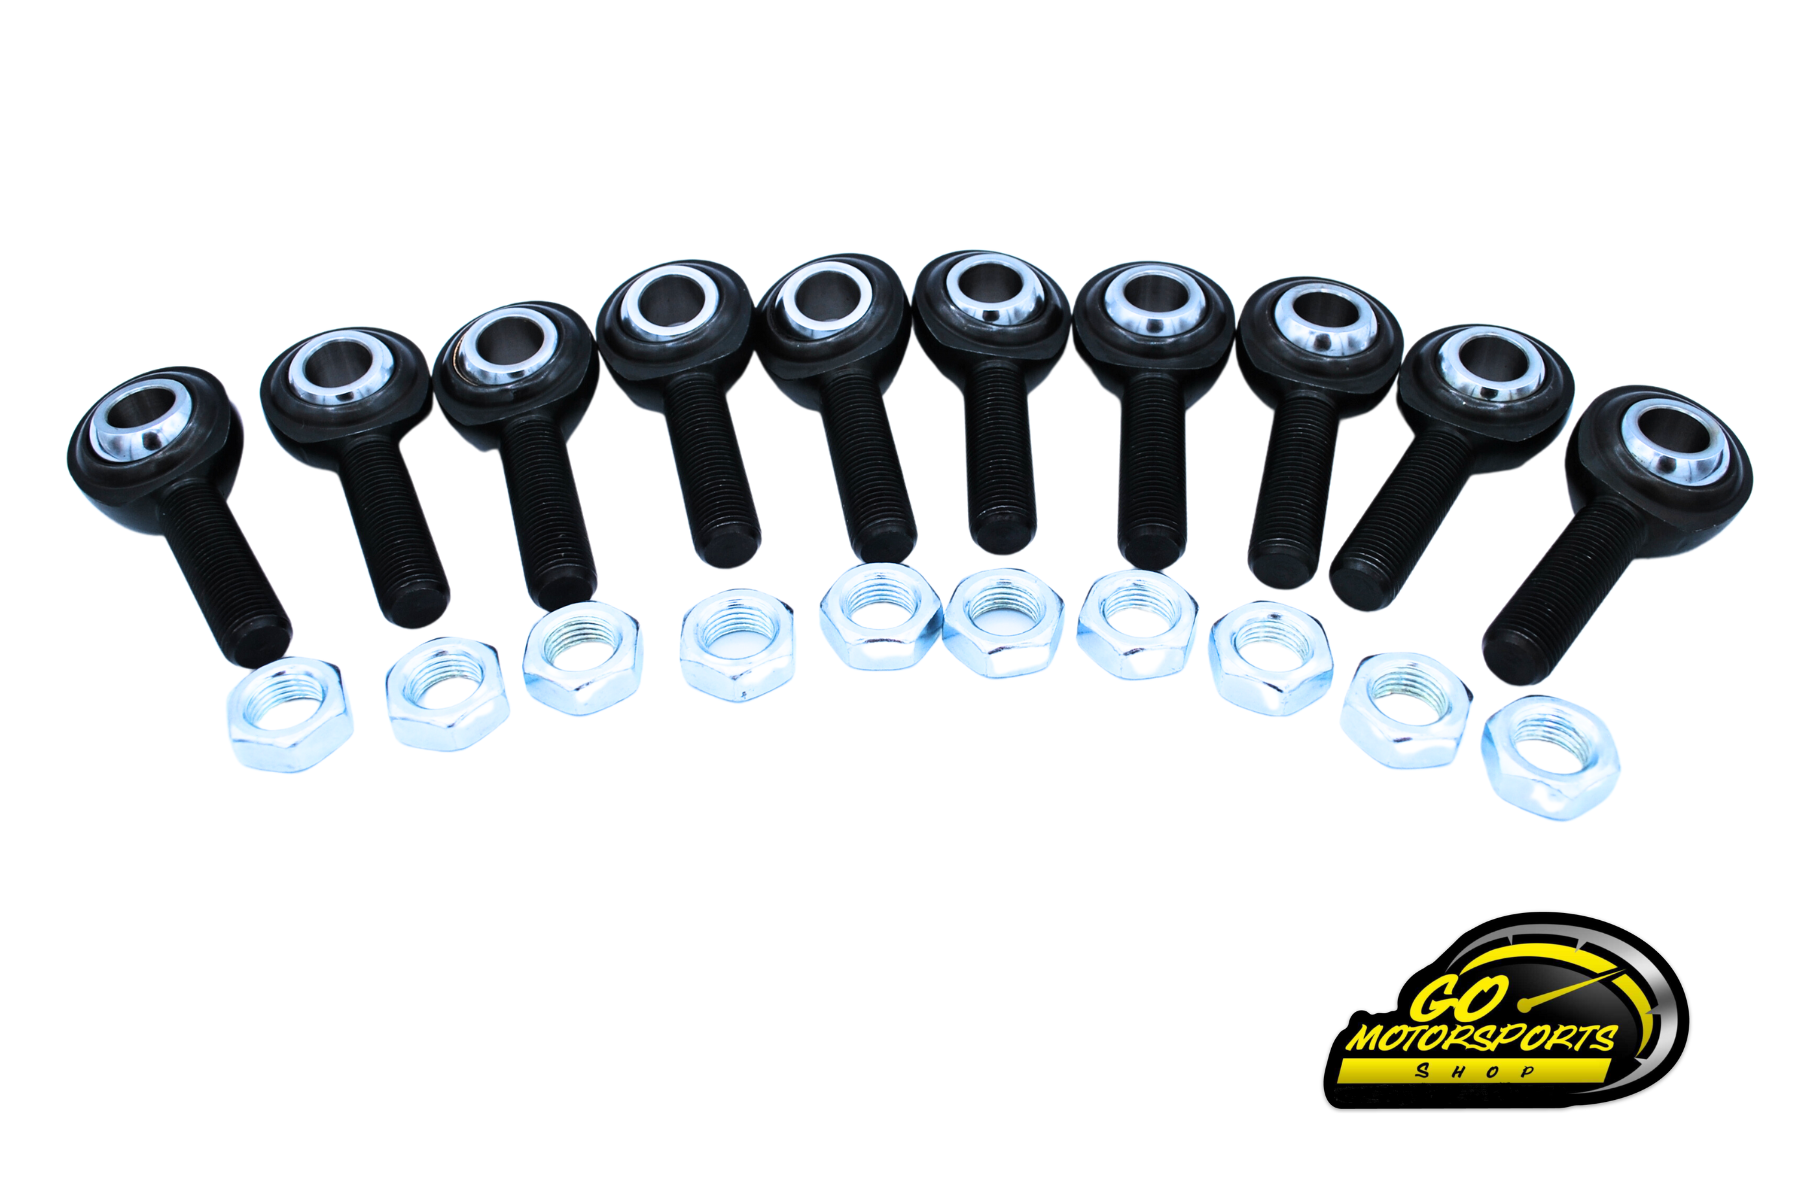 Superior Bearing and Supply, Heim / Jam Nut Package of 1/2" X 1/2" 2-Piece Black Oxide Chrome Molly | Legend Car